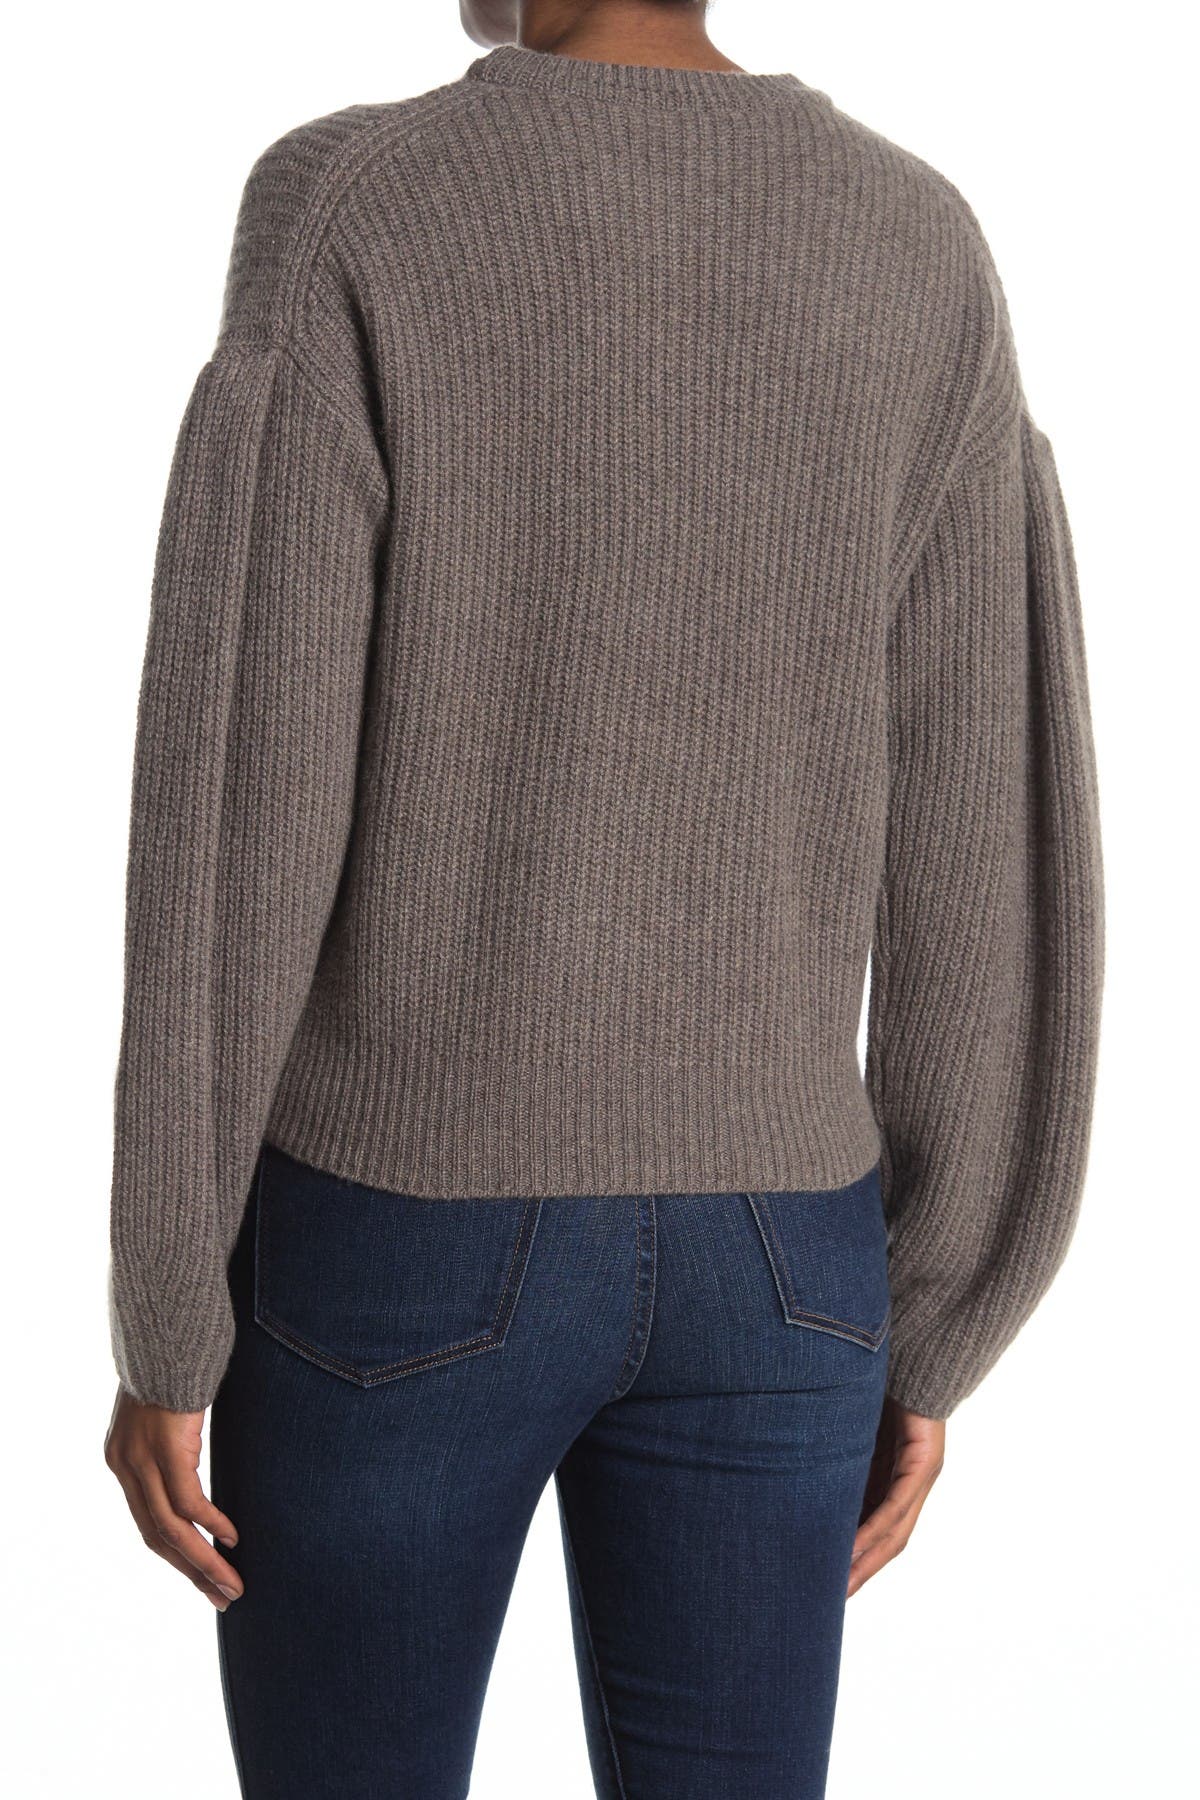 360cashmere Ambrose Crew Neck Sweater In Brown